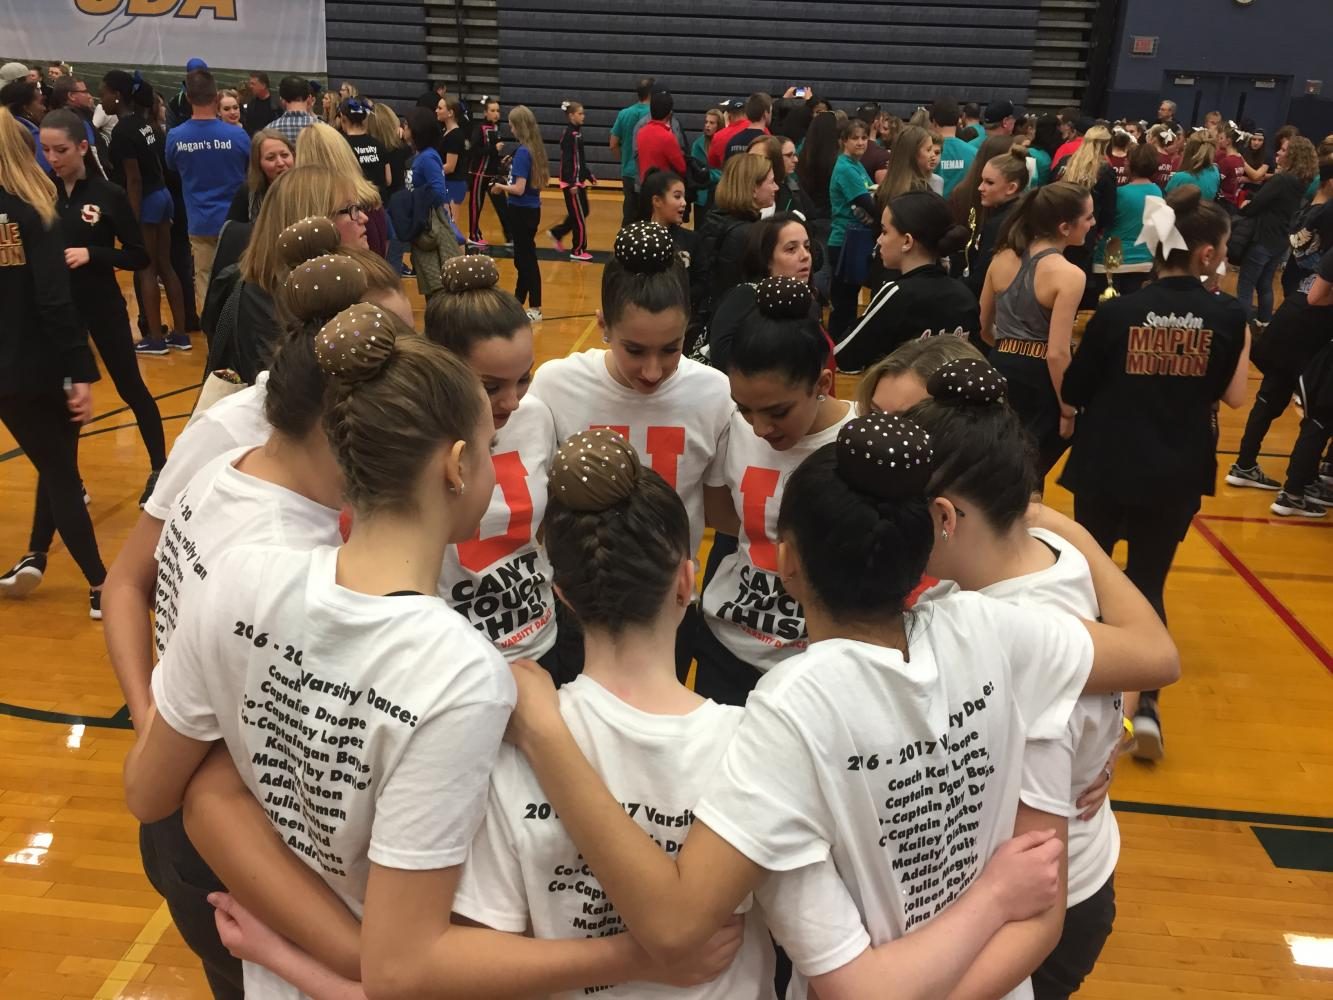 The dance team prepares for a competition